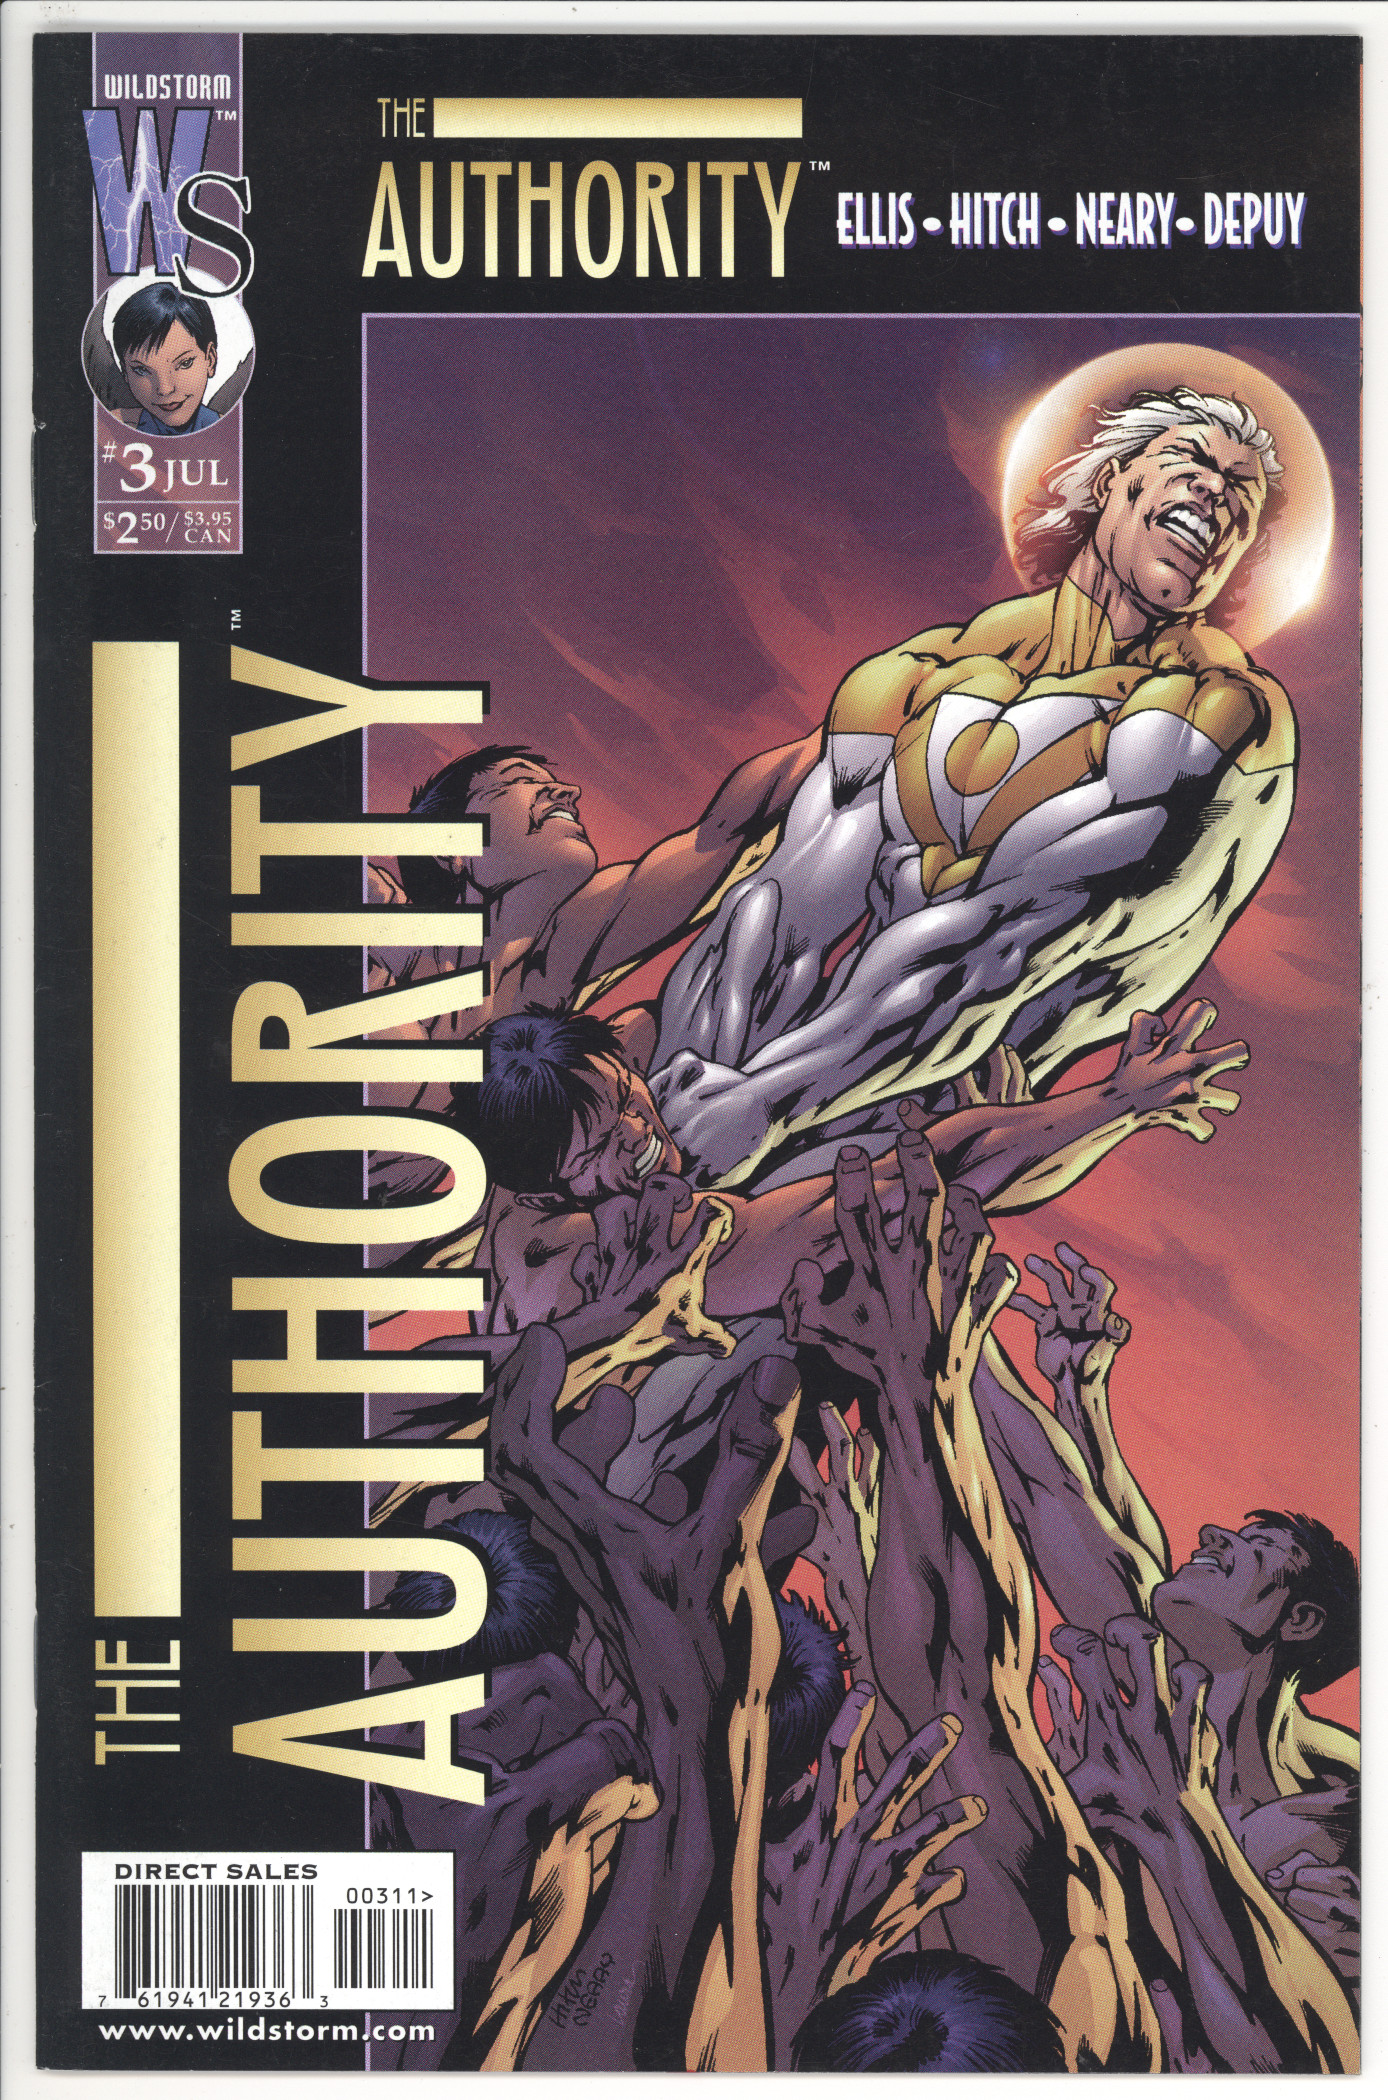 Authority #3 front